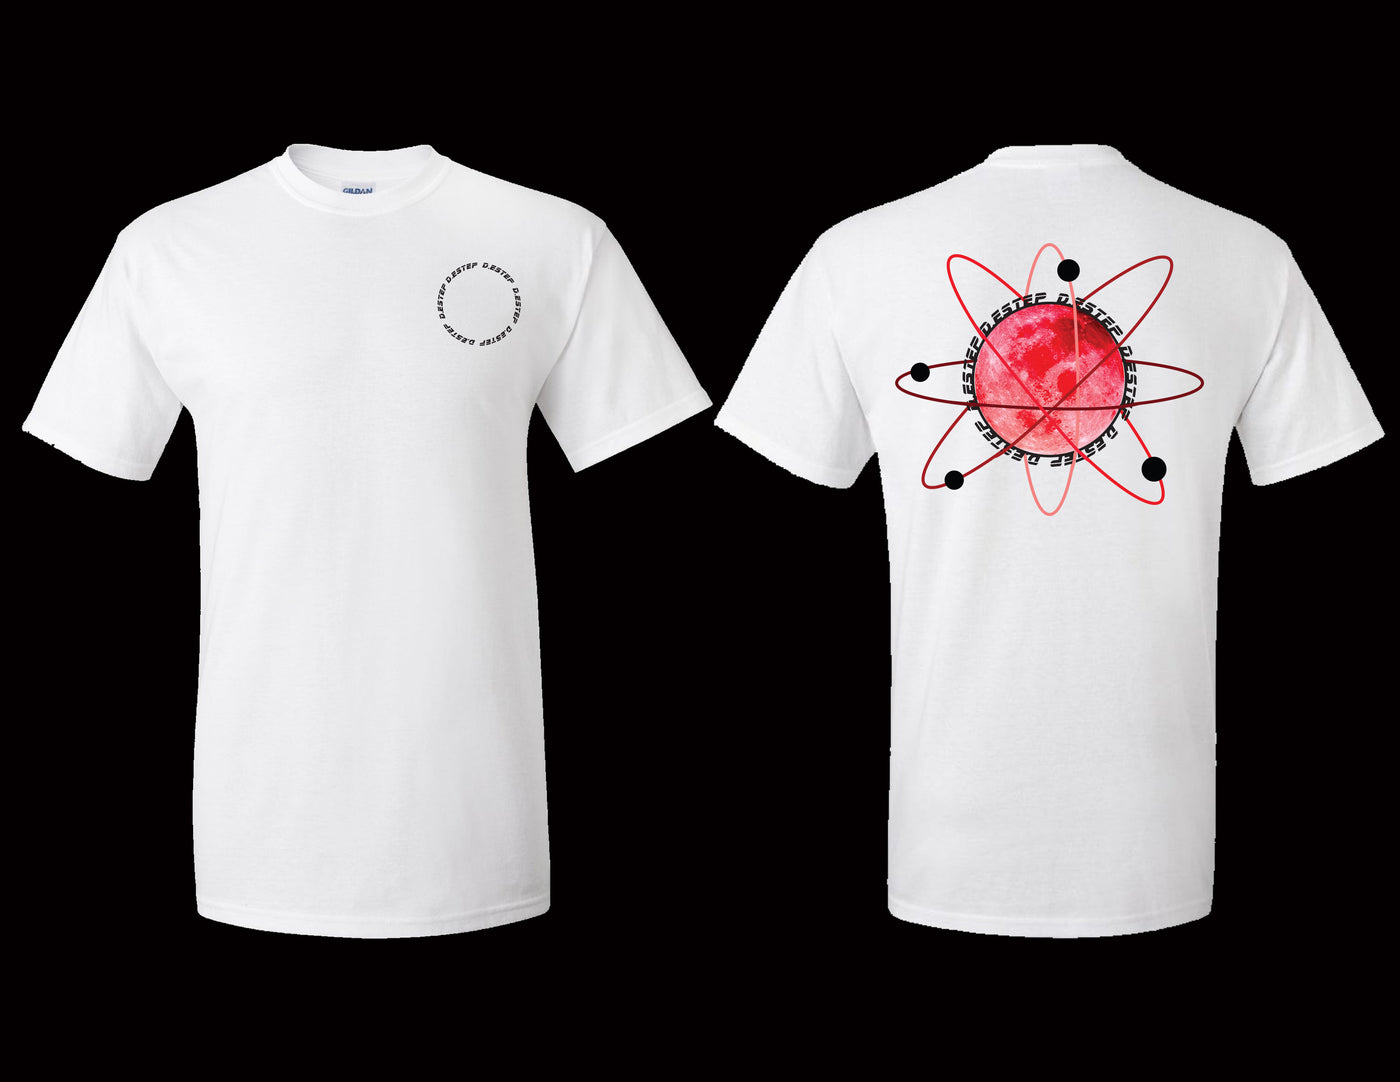 WHITE “Outer Space” tee